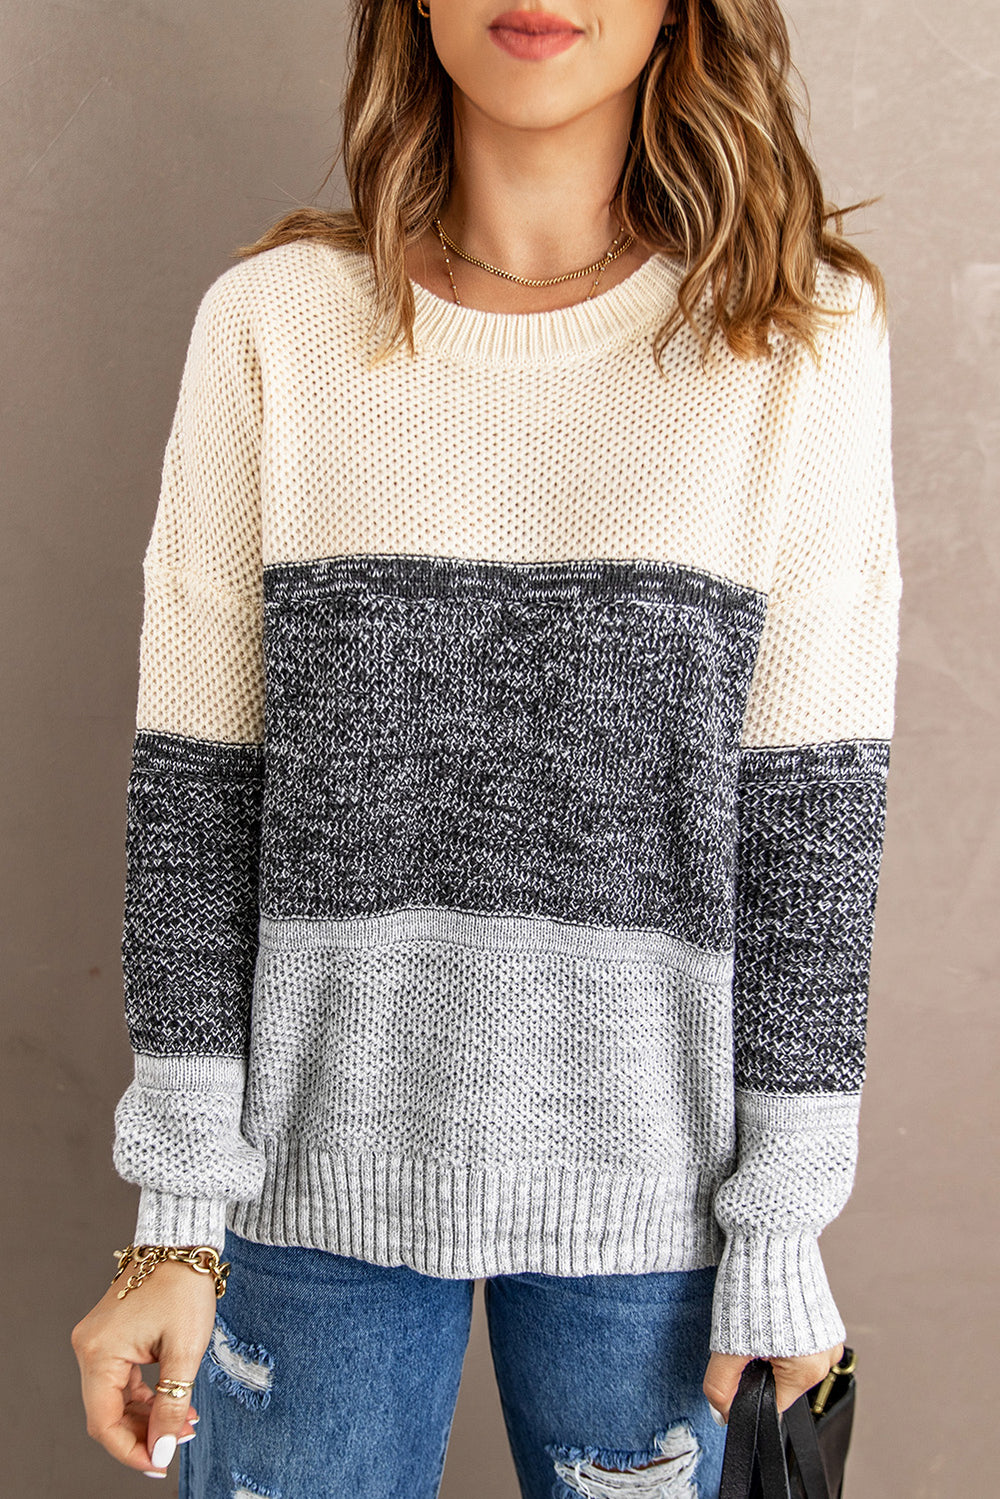 Winter Gray Color Block Netted Texture Pullover Sweater